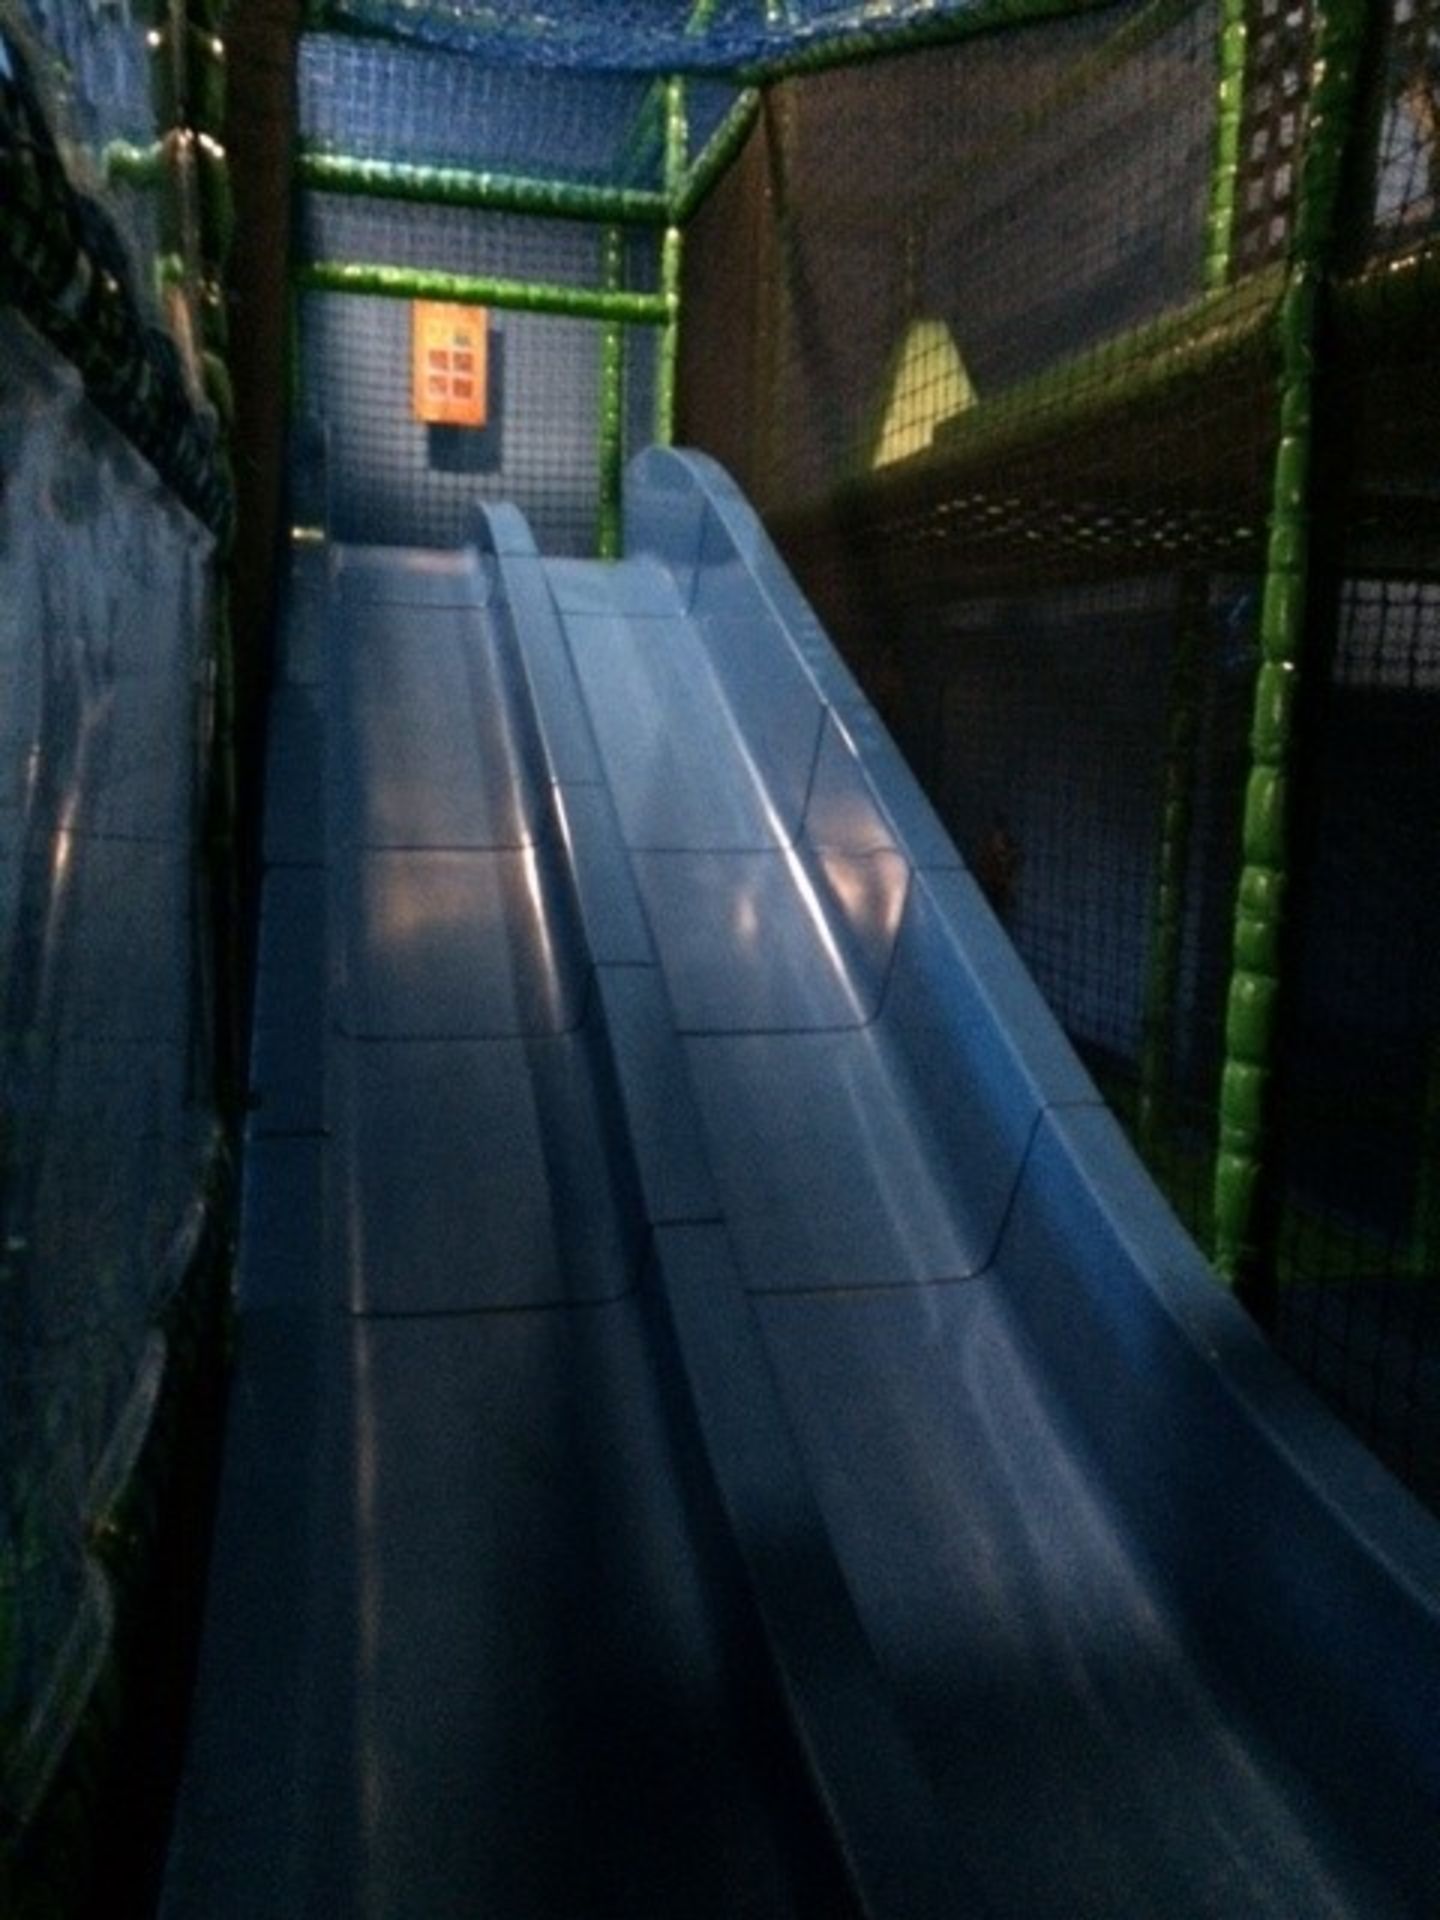 Soft Play Zone - Image 4 of 12